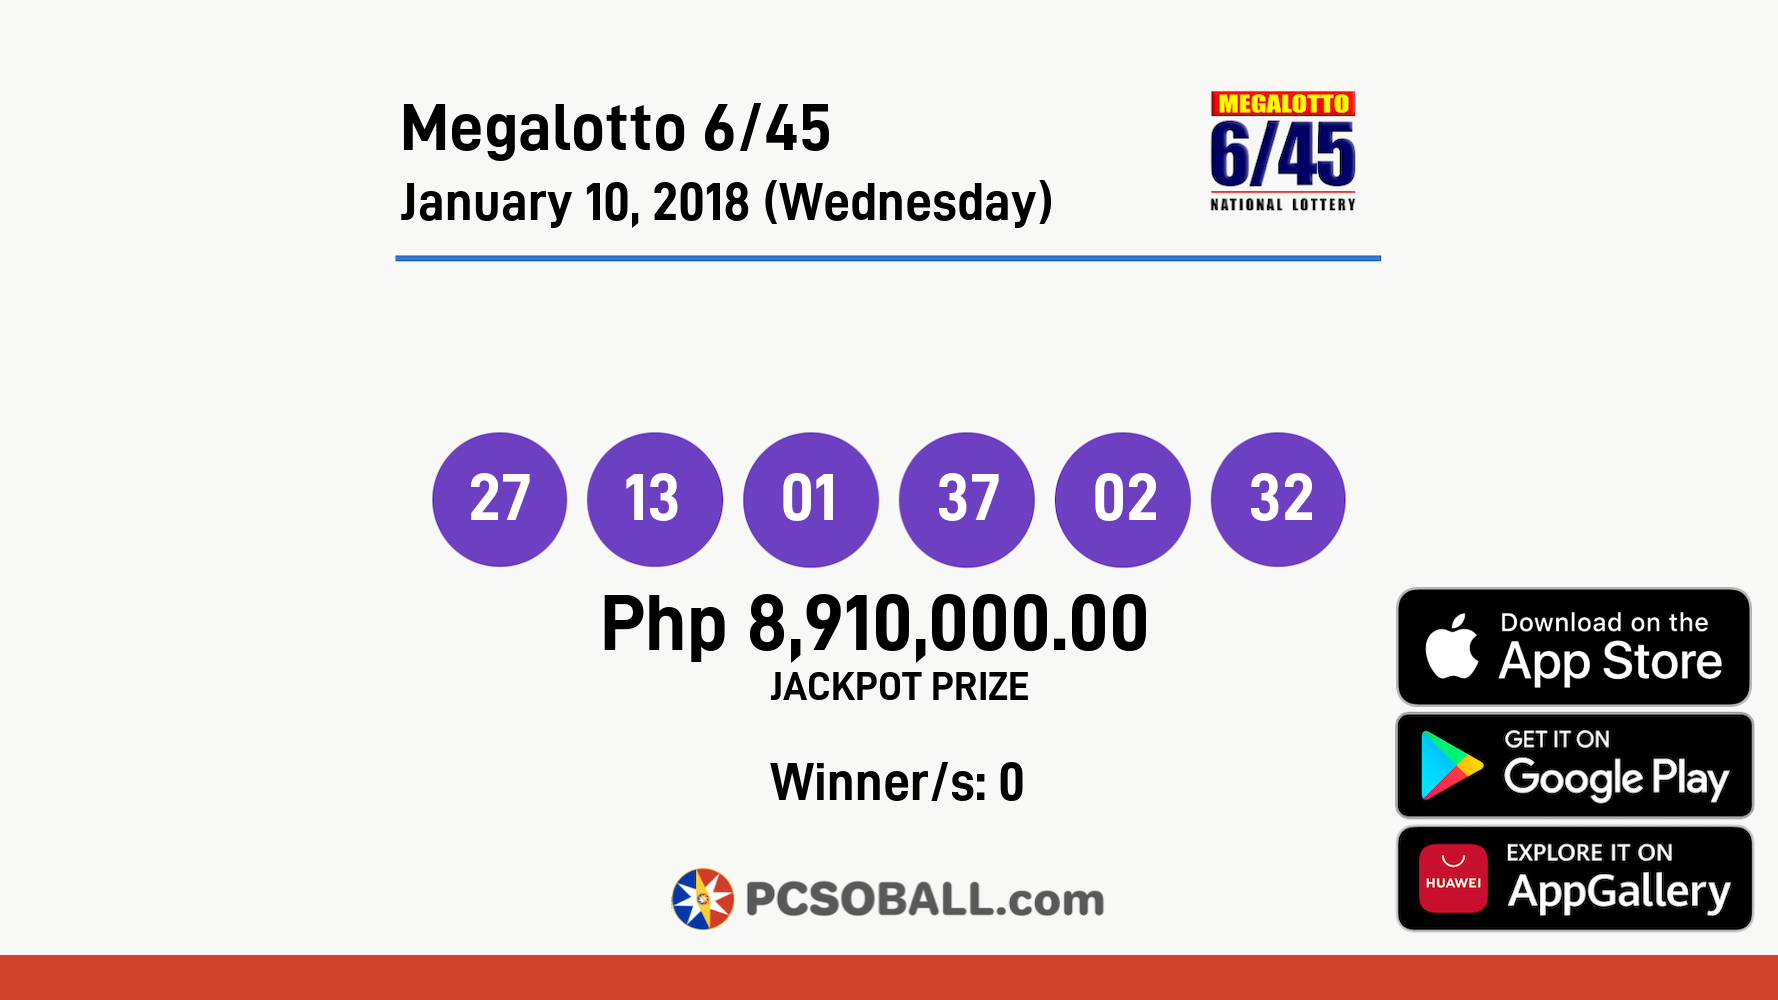 Megalotto 6/45 January 10, 2018 (Wednesday) Result